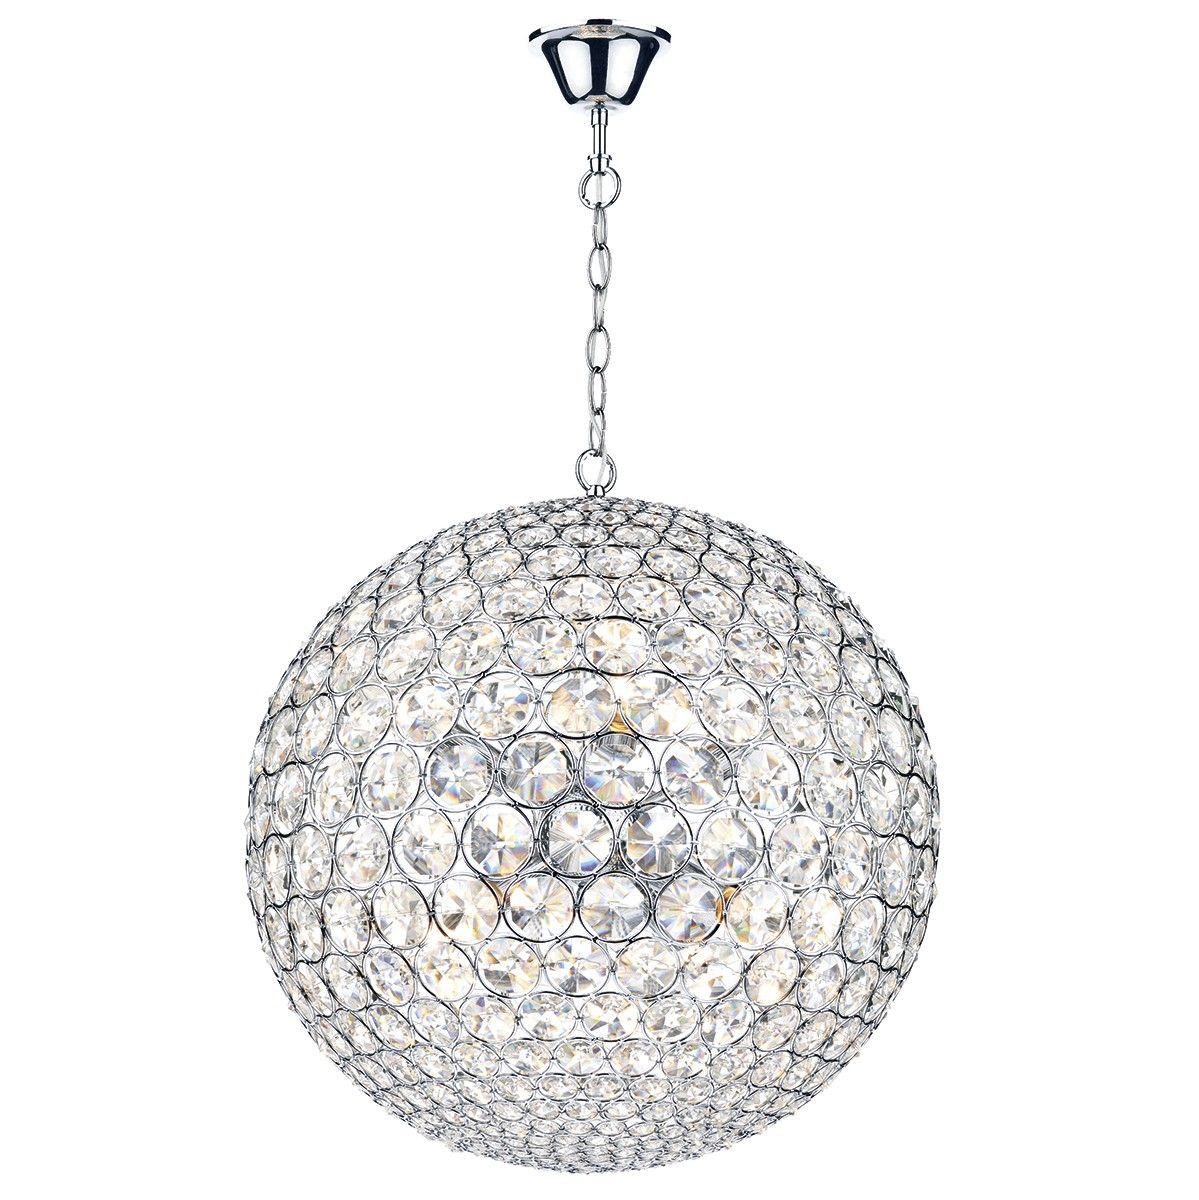 Home – Astral Lighting Ltd With Regard To Hatfield 3 Light Novelty Chandeliers (View 29 of 30)